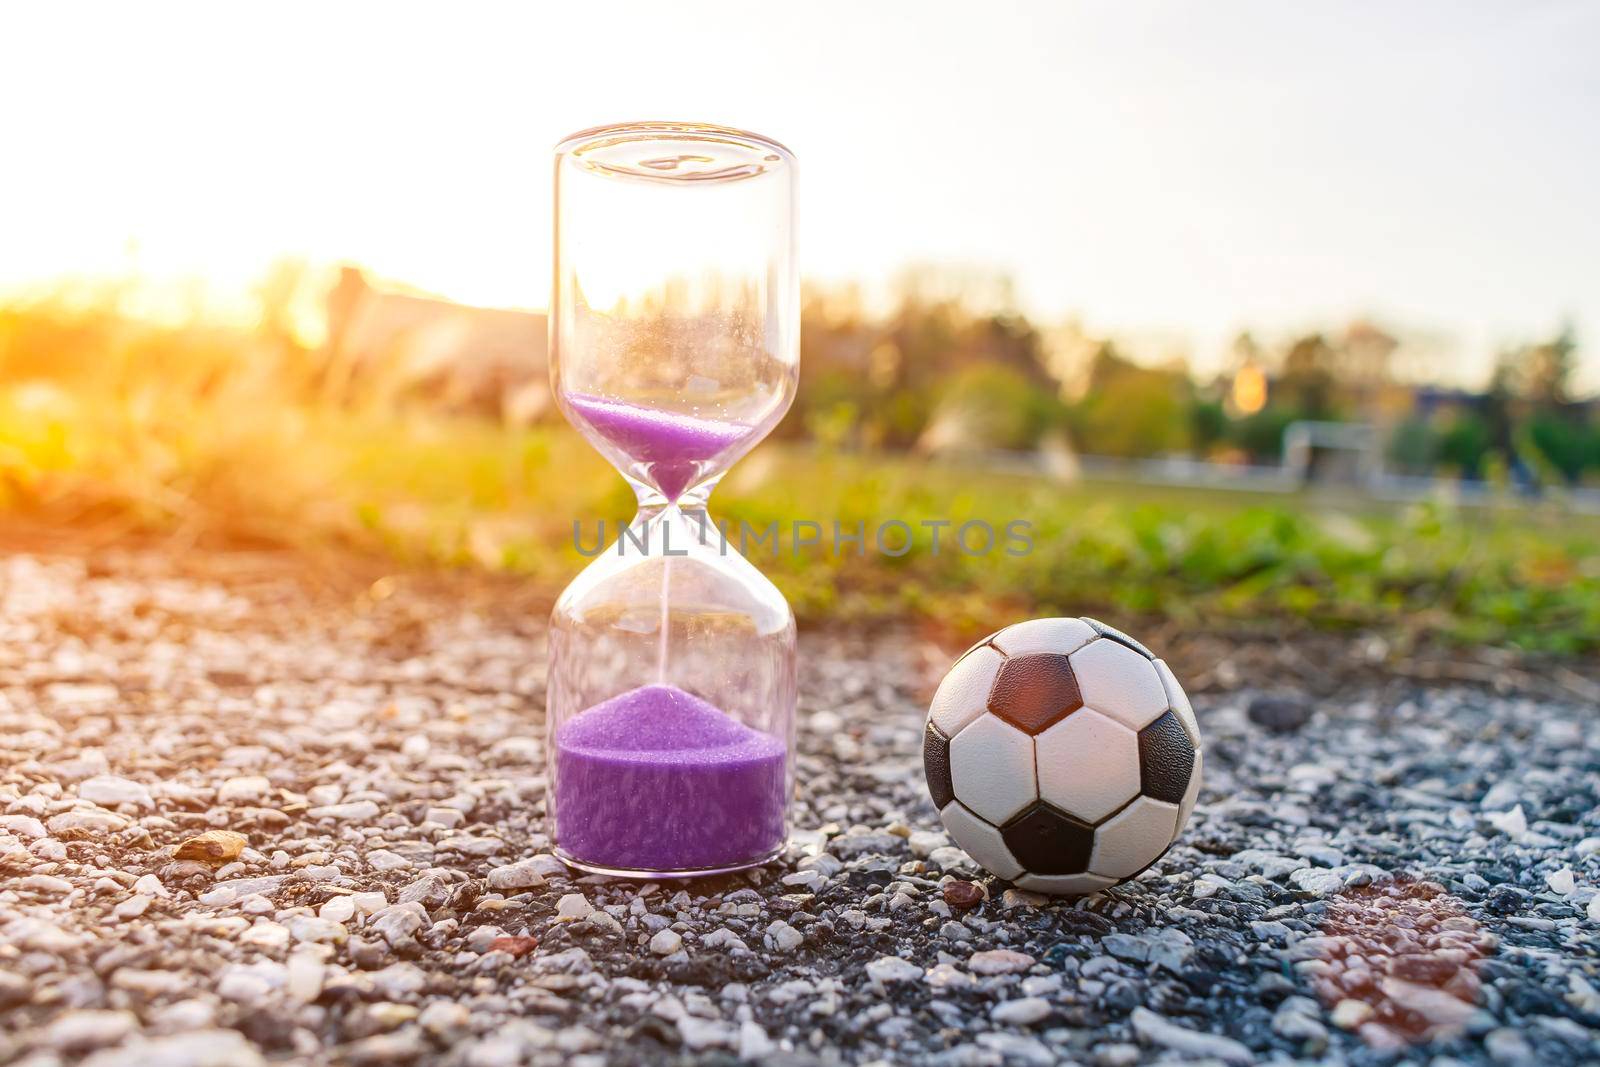 Soccer ball and hourglass symbolizing football time by Skaron